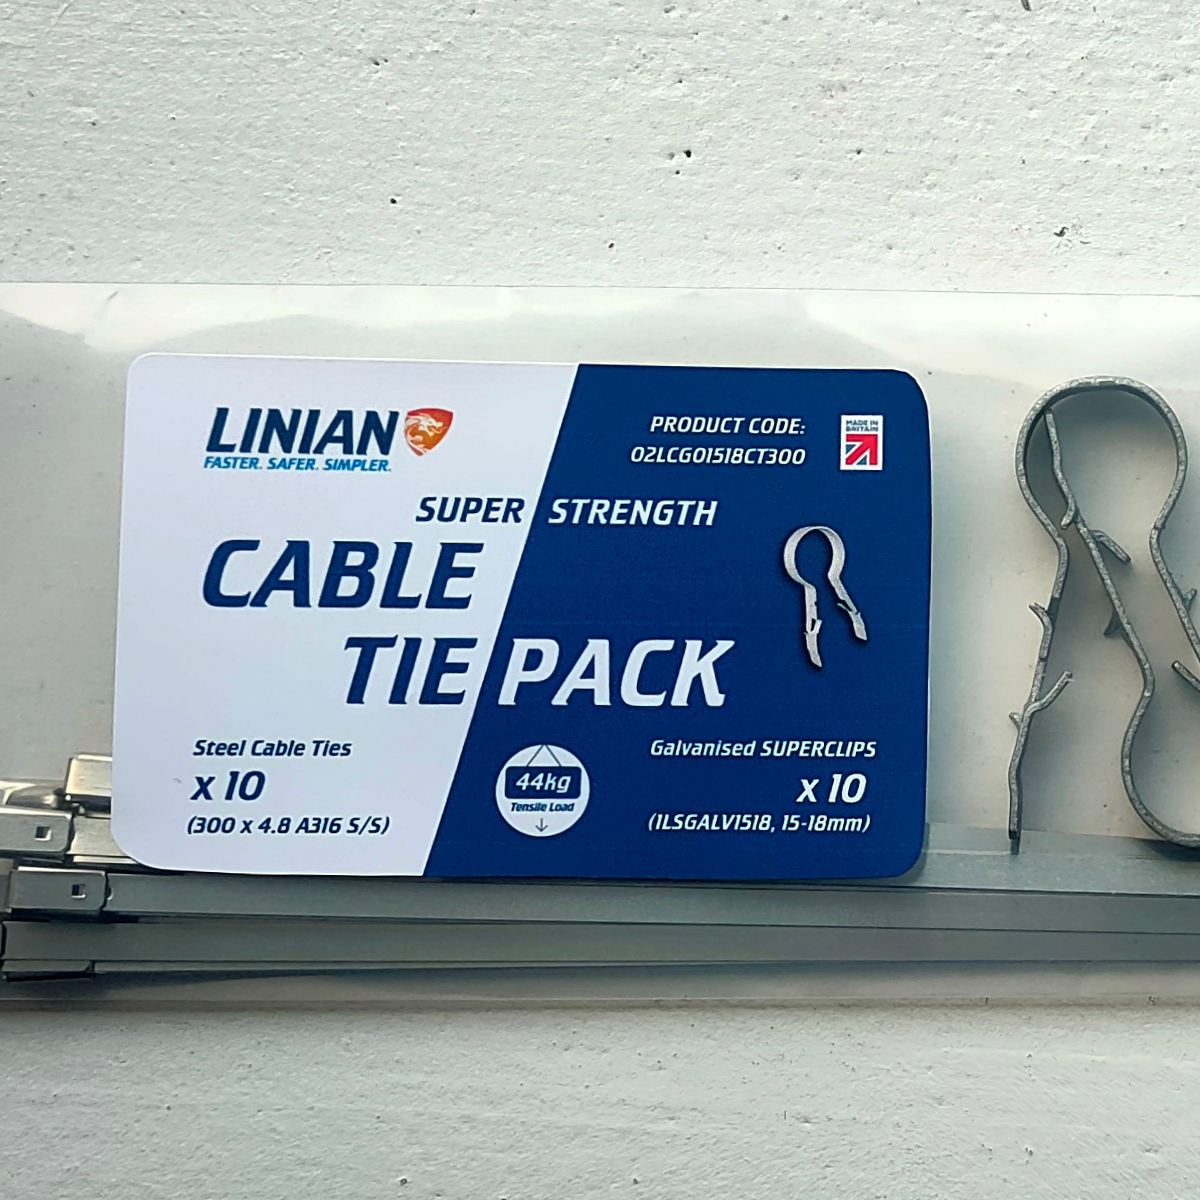 LINIAN Super Strength CABLE TIE PACK